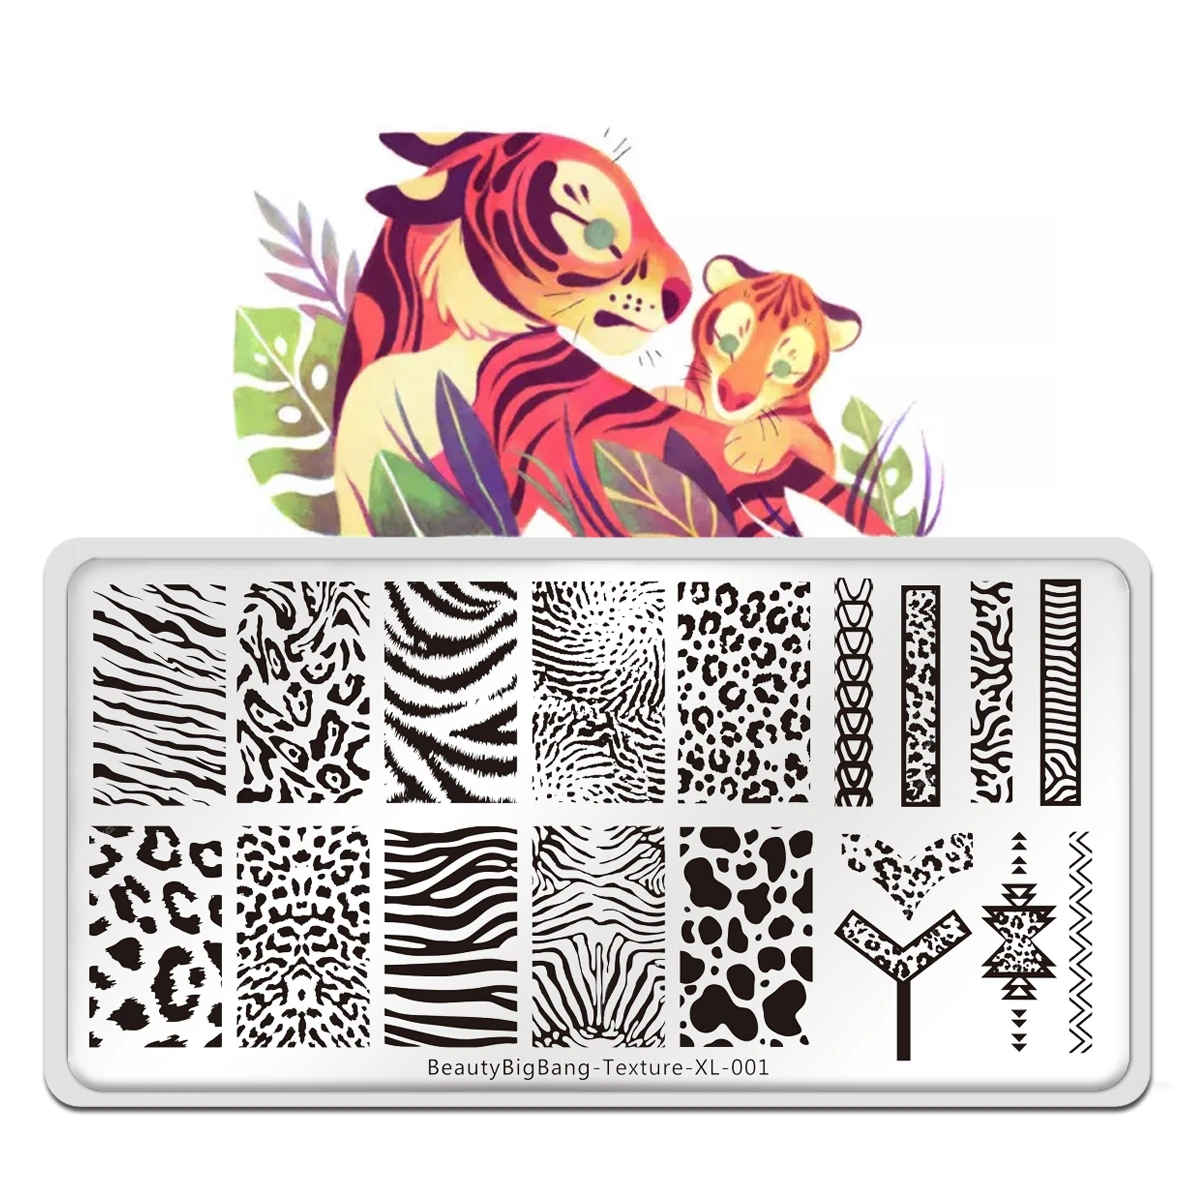 

Beauty BigBang Animal Image Nail Art Stamping Plates Tiger Zebra Leopard Print Texture XL-001 Stainless Steel Template Mold